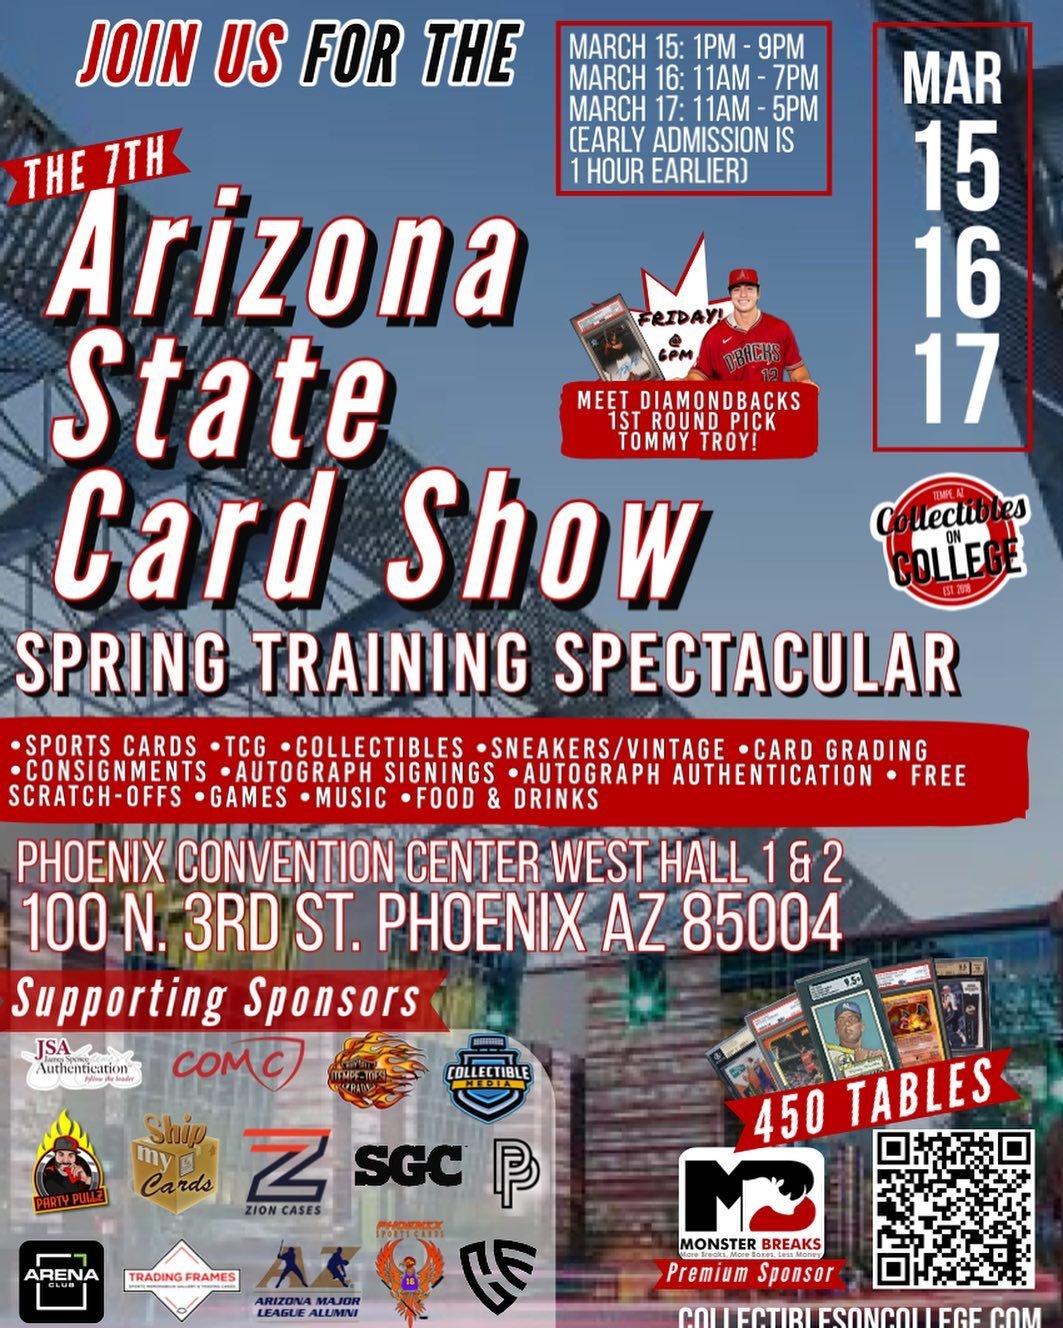 Heading back to the Phoenix Convention Center for Day 2 of the @arizonastatecardshow. Very excited to see what today brings! @biceballcards @bossmansportscards